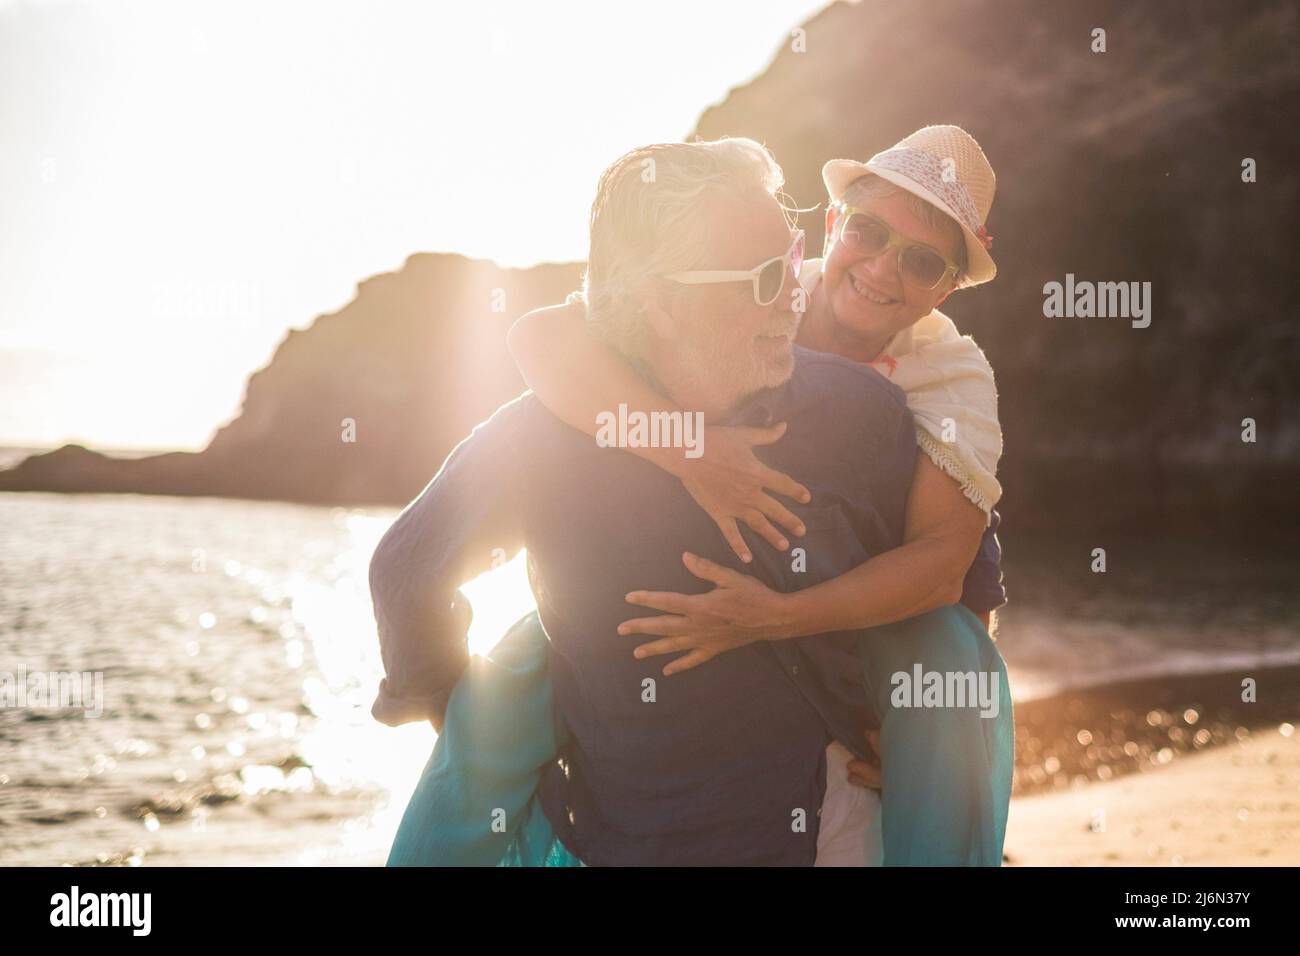 Old people active couple enjoy outdoor leisure activity together playing and carrying woman in piggyback at the beach during sunset holiday vacation Stock Photo